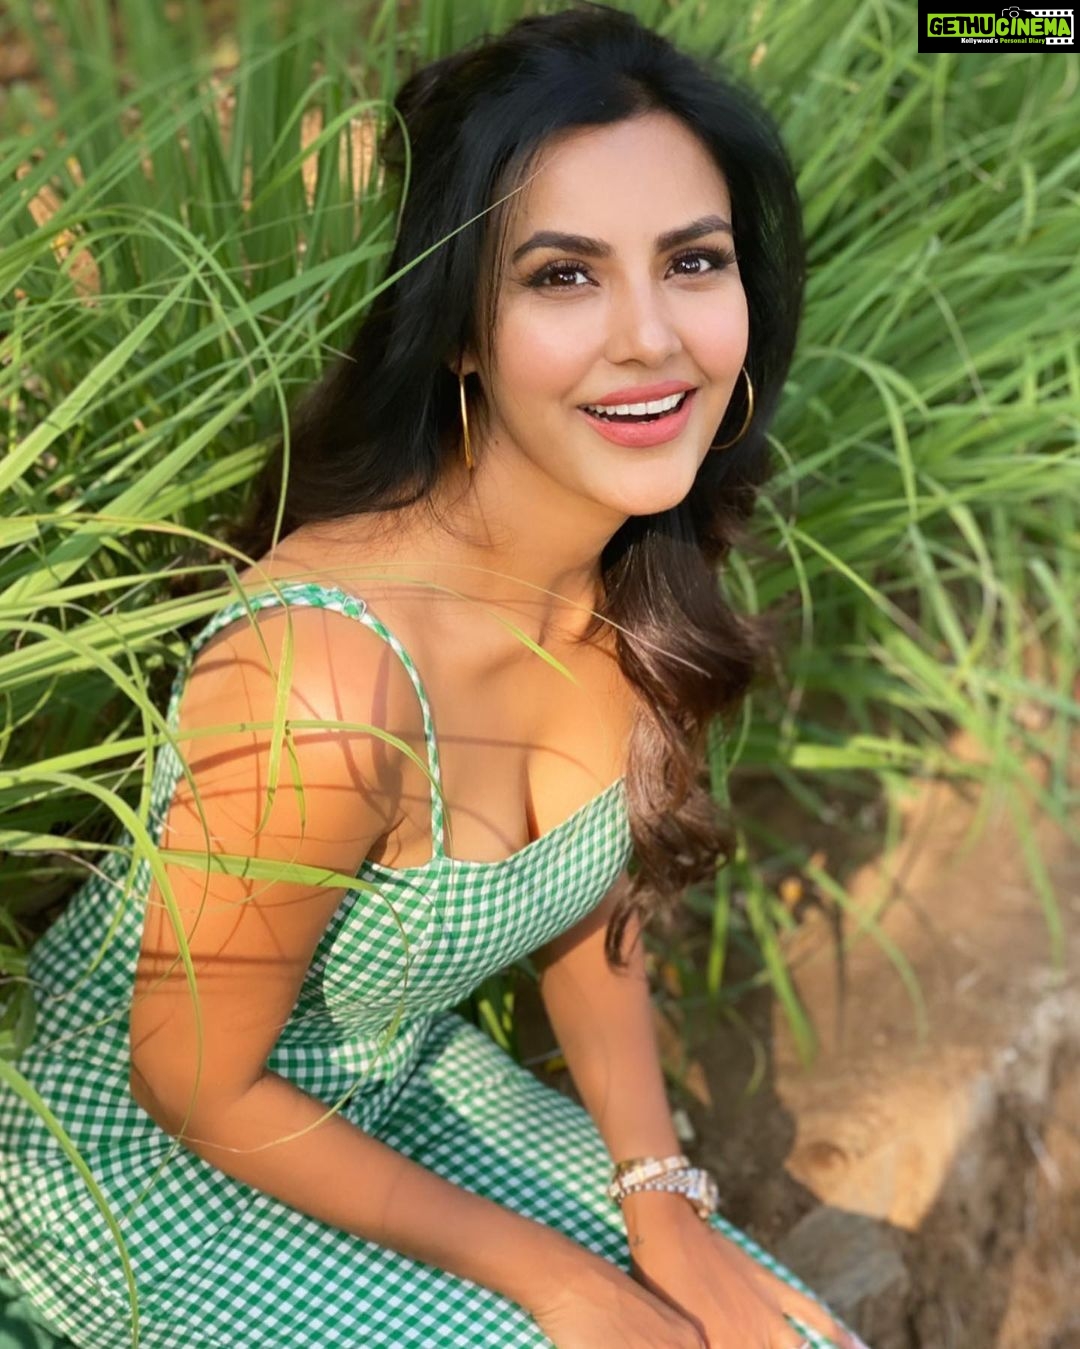 Priya Anand - 187.5K Likes - Most Liked Instagram Photos